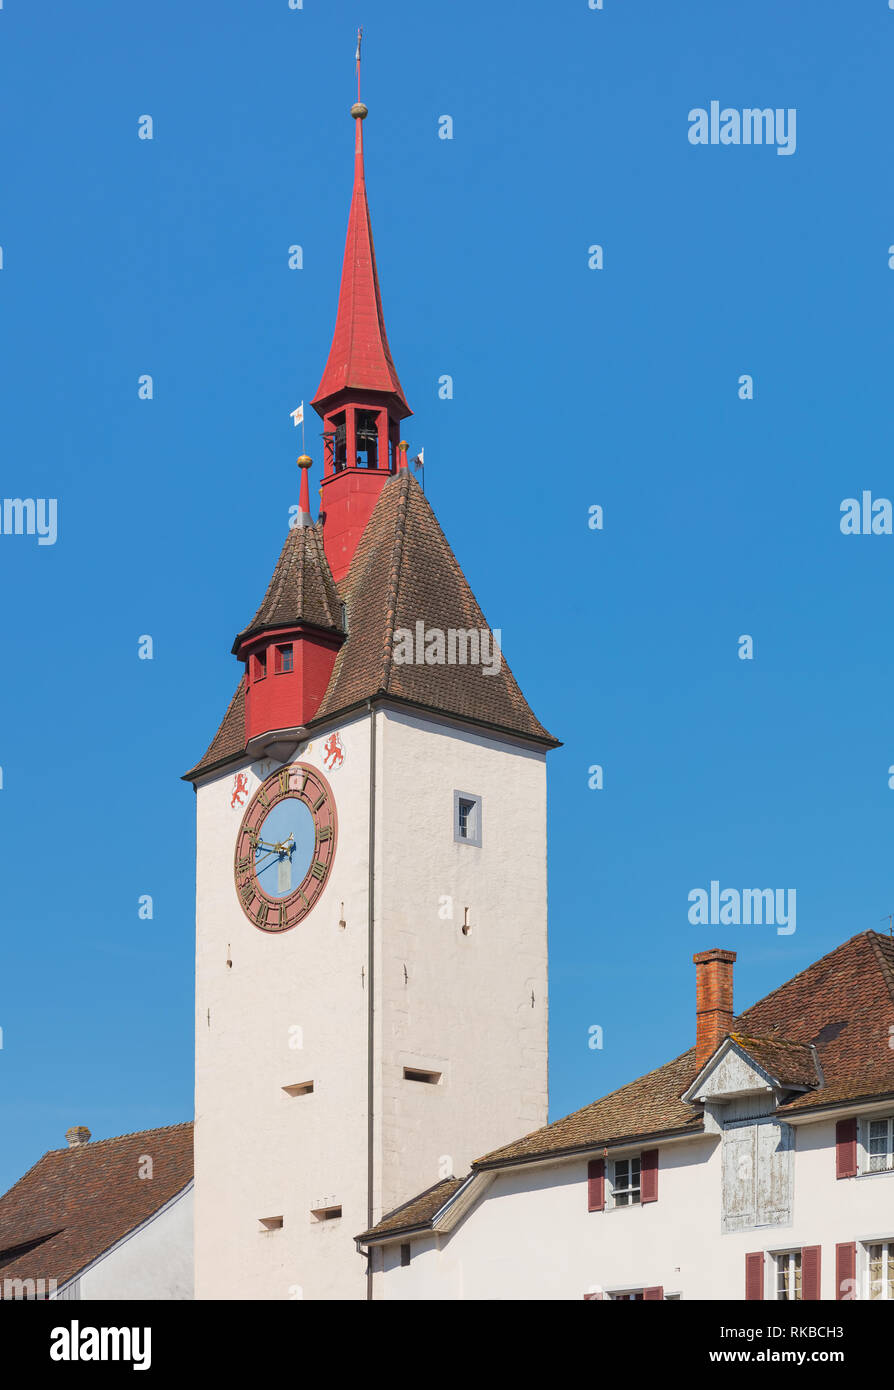 Buildings of the historic part of the town of Bremgarten, Switzerland Stock Photo